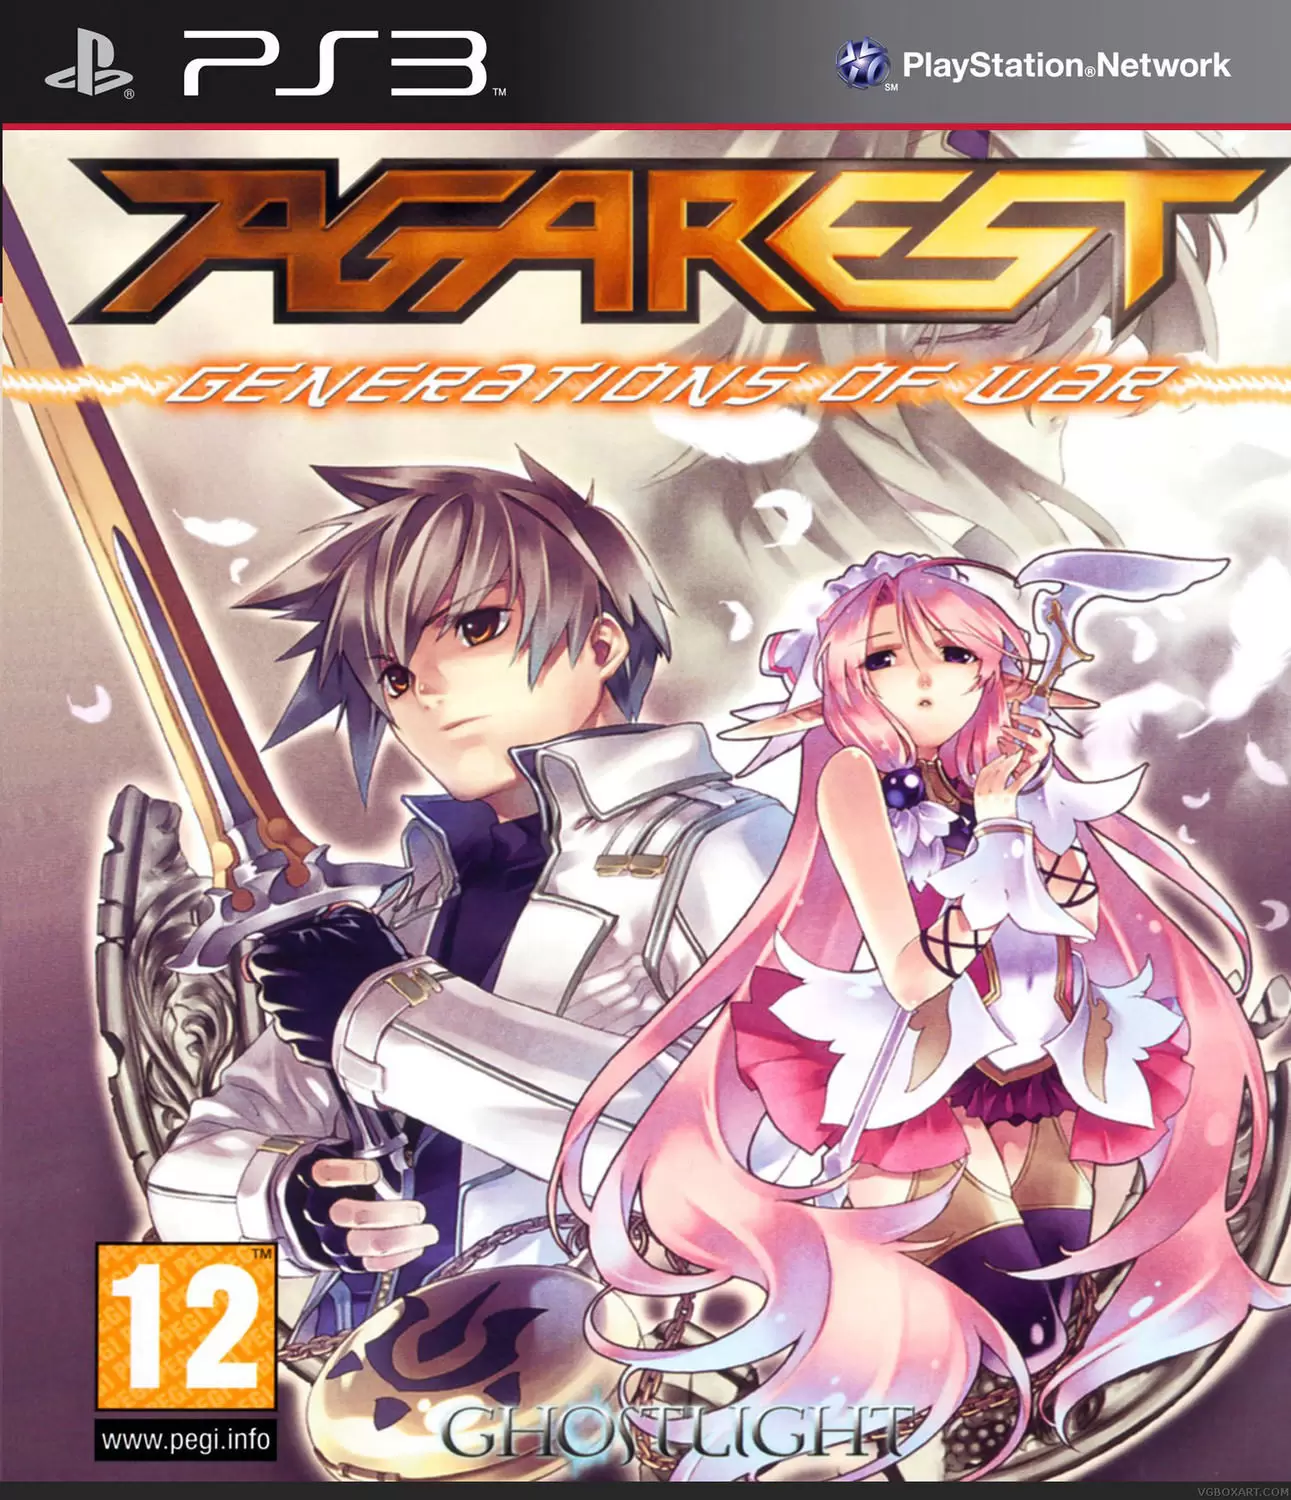 PS3 Games - Agarest: Generations Of War